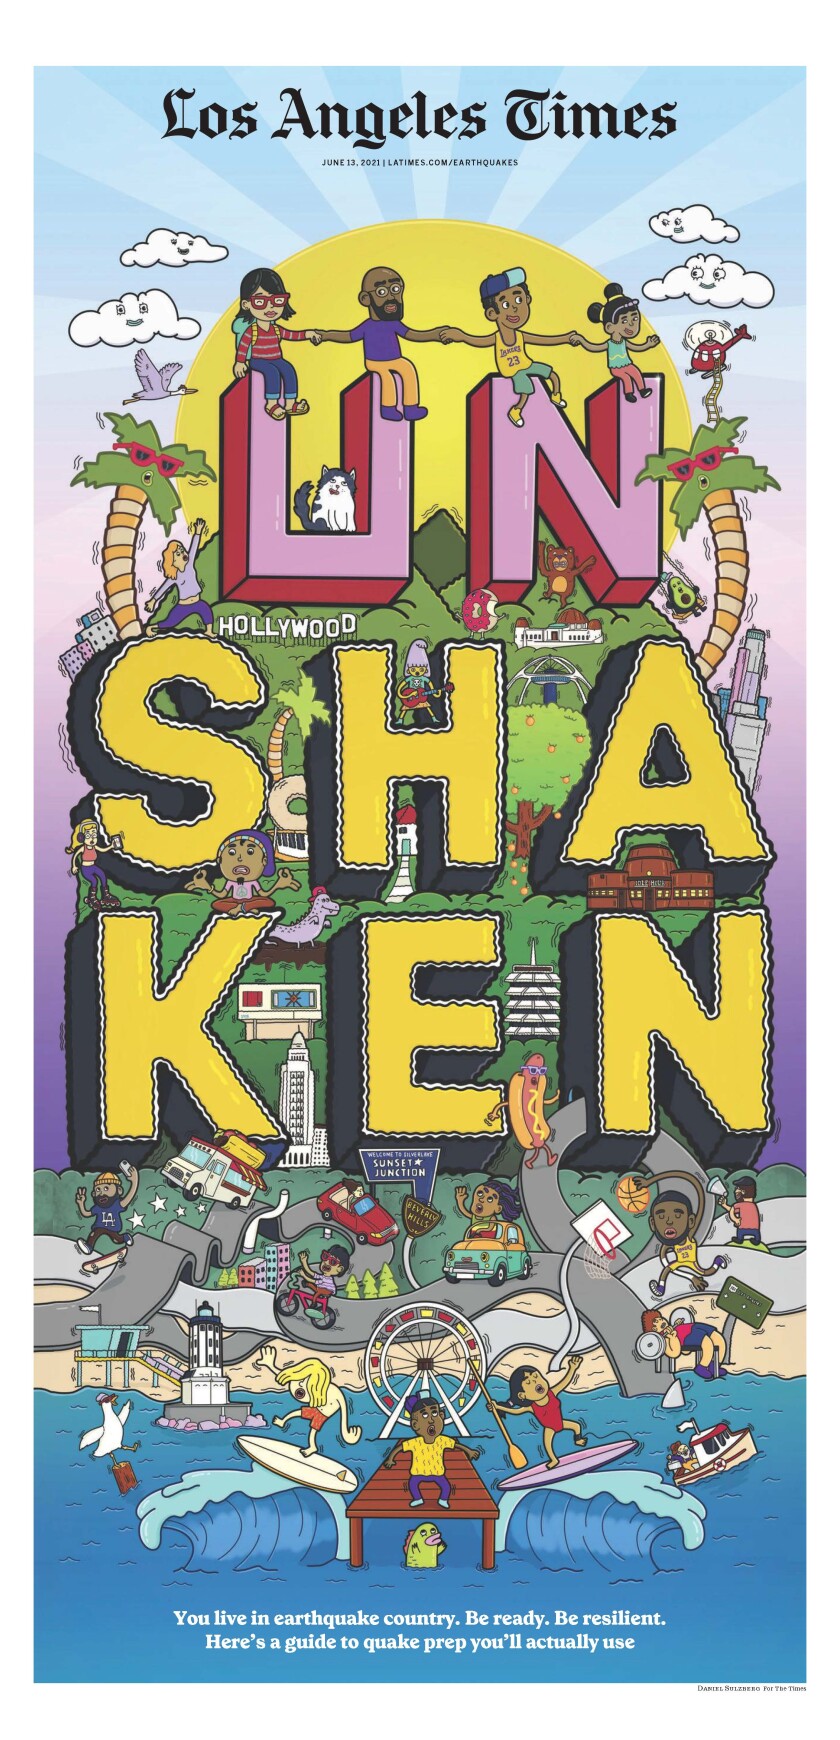 The 24-page premium print guide, "Unshaken,” will debut on Sunday, June 13.